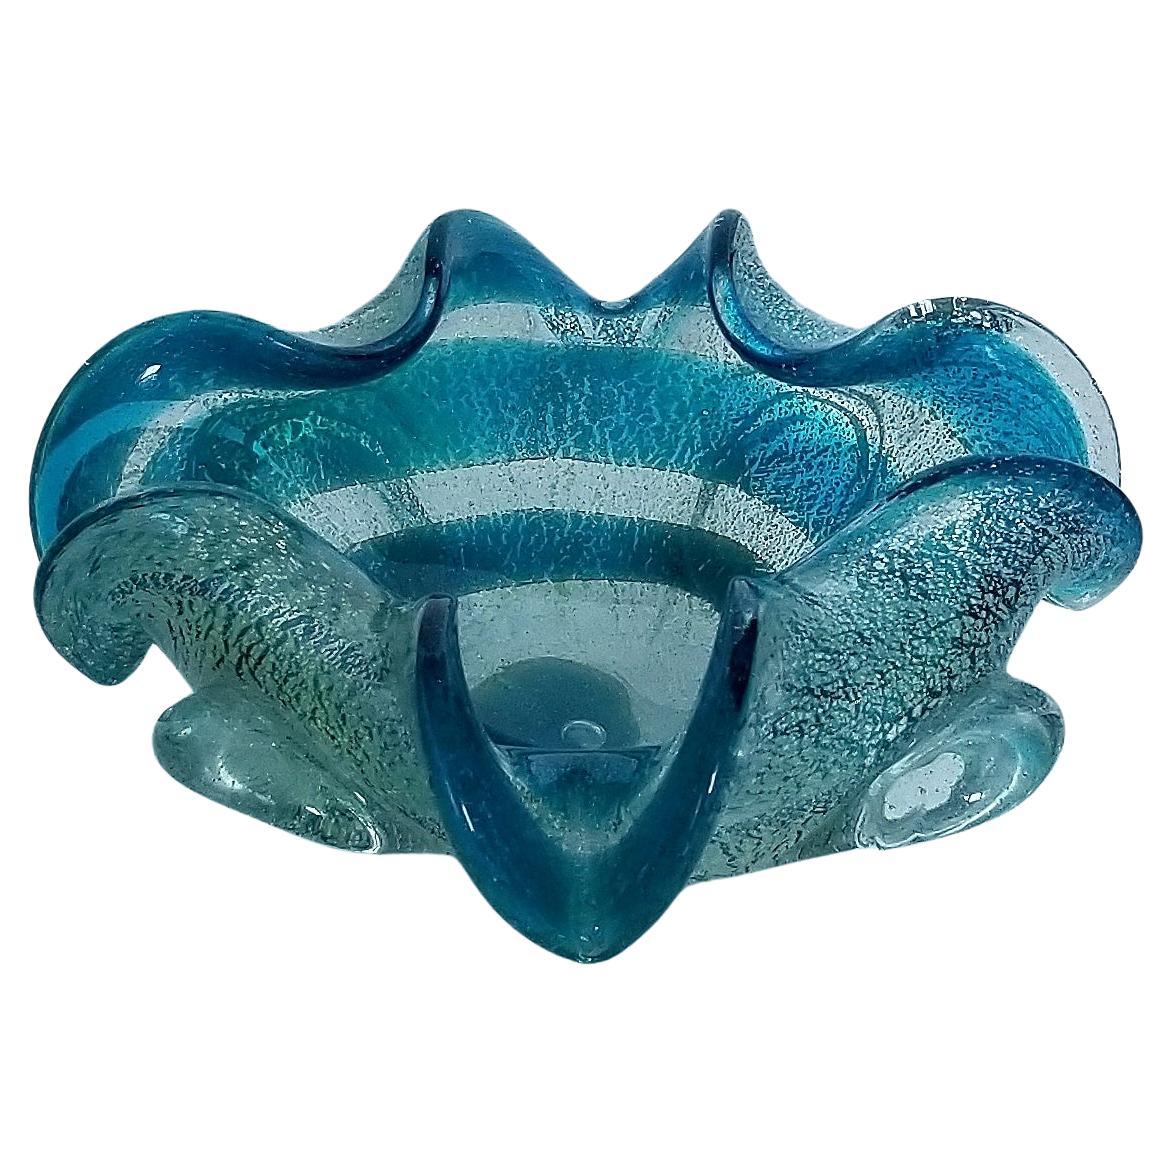 Blue and Silver Murano Glass Ashtray or Catch-all Bowl